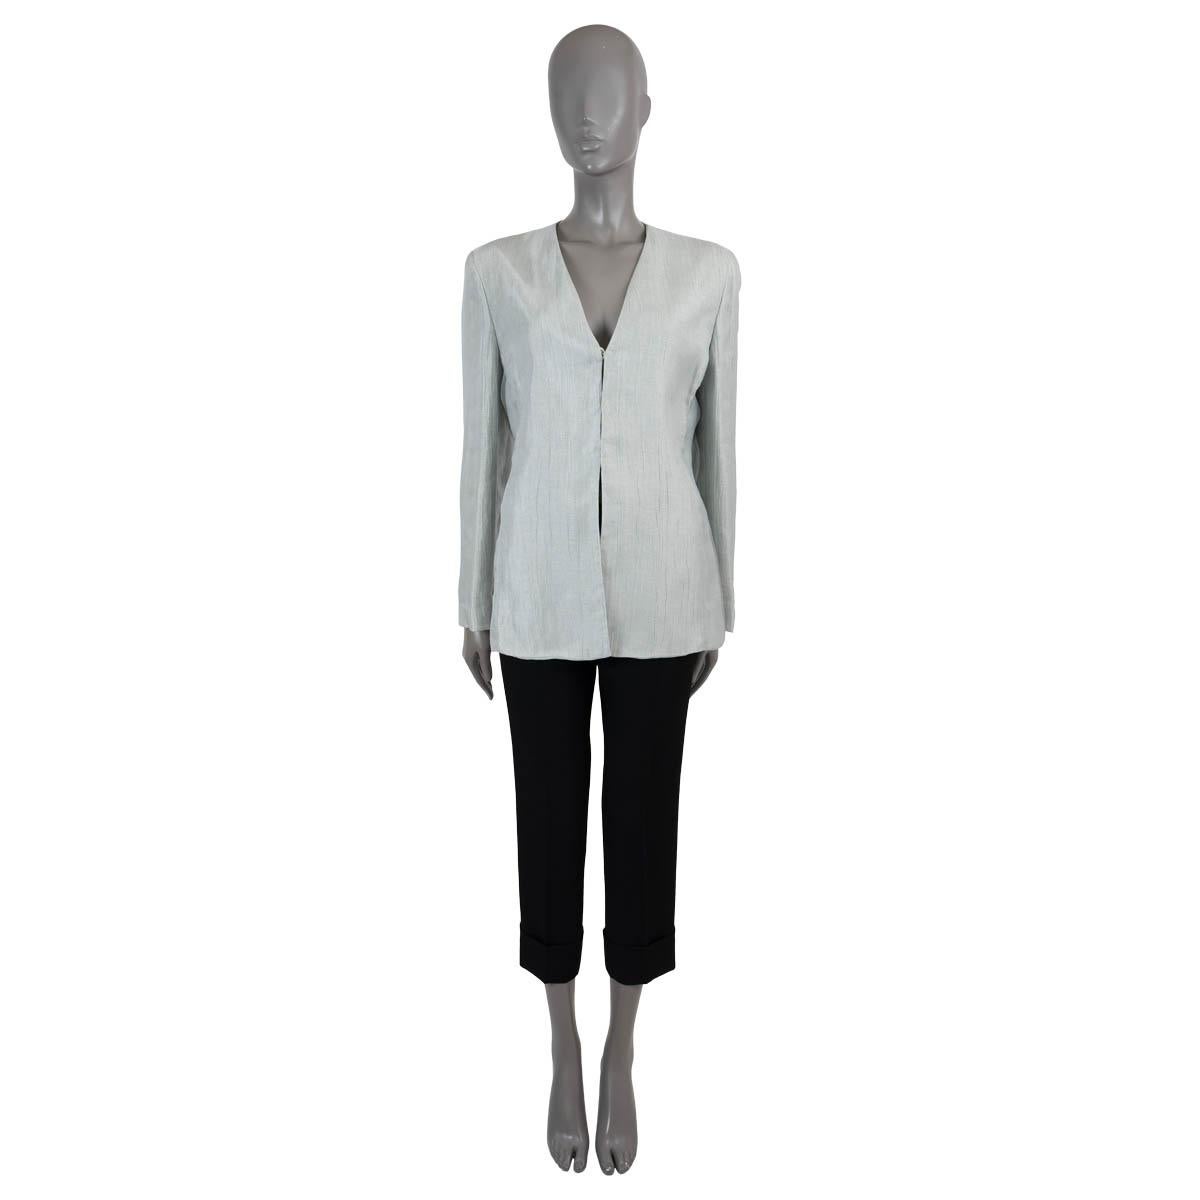 100% authentic Giorgio Armani collarless blazer in irregular textures pale mint green linen (53%), silk (27%), viscose (20%) with a shiny sheer tulle-like layer on top. Features a V-neck and straight hem. Closes with concealed buttons on the front